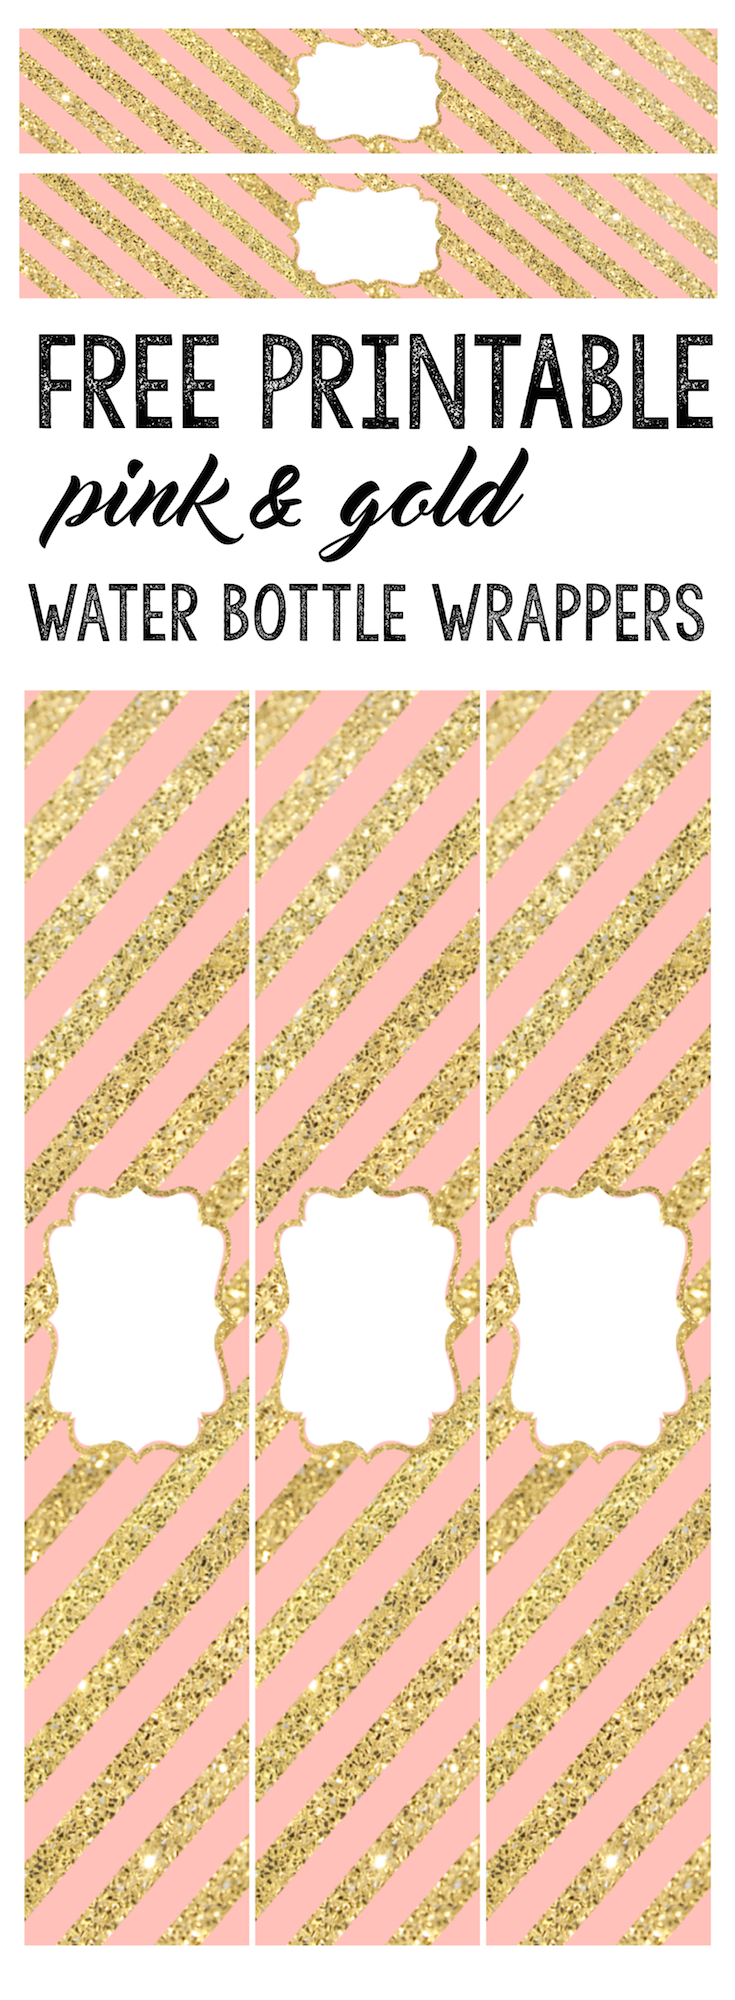 Pink and Gold Water Bottle Wrappers free printable. Print these adorable water bottle wrappers for your baby shower, bridal shower, birthday party, wedding reception or whatever event you dream up.